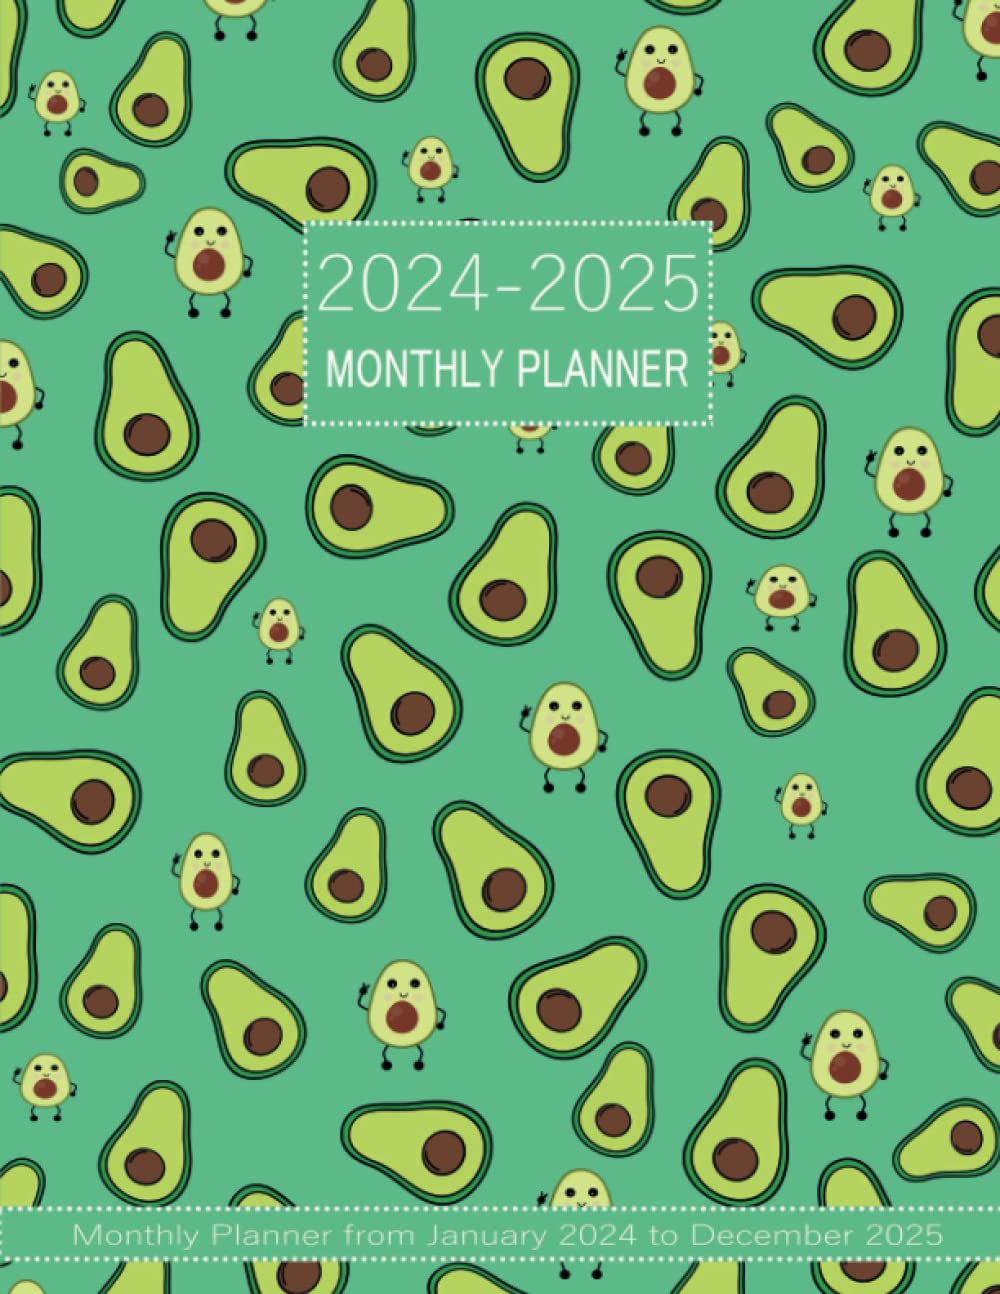 2024-2025 avocado monthly planner: two years (January 2024 to December 2025) with Federal Holidays ,Schedule Organizer